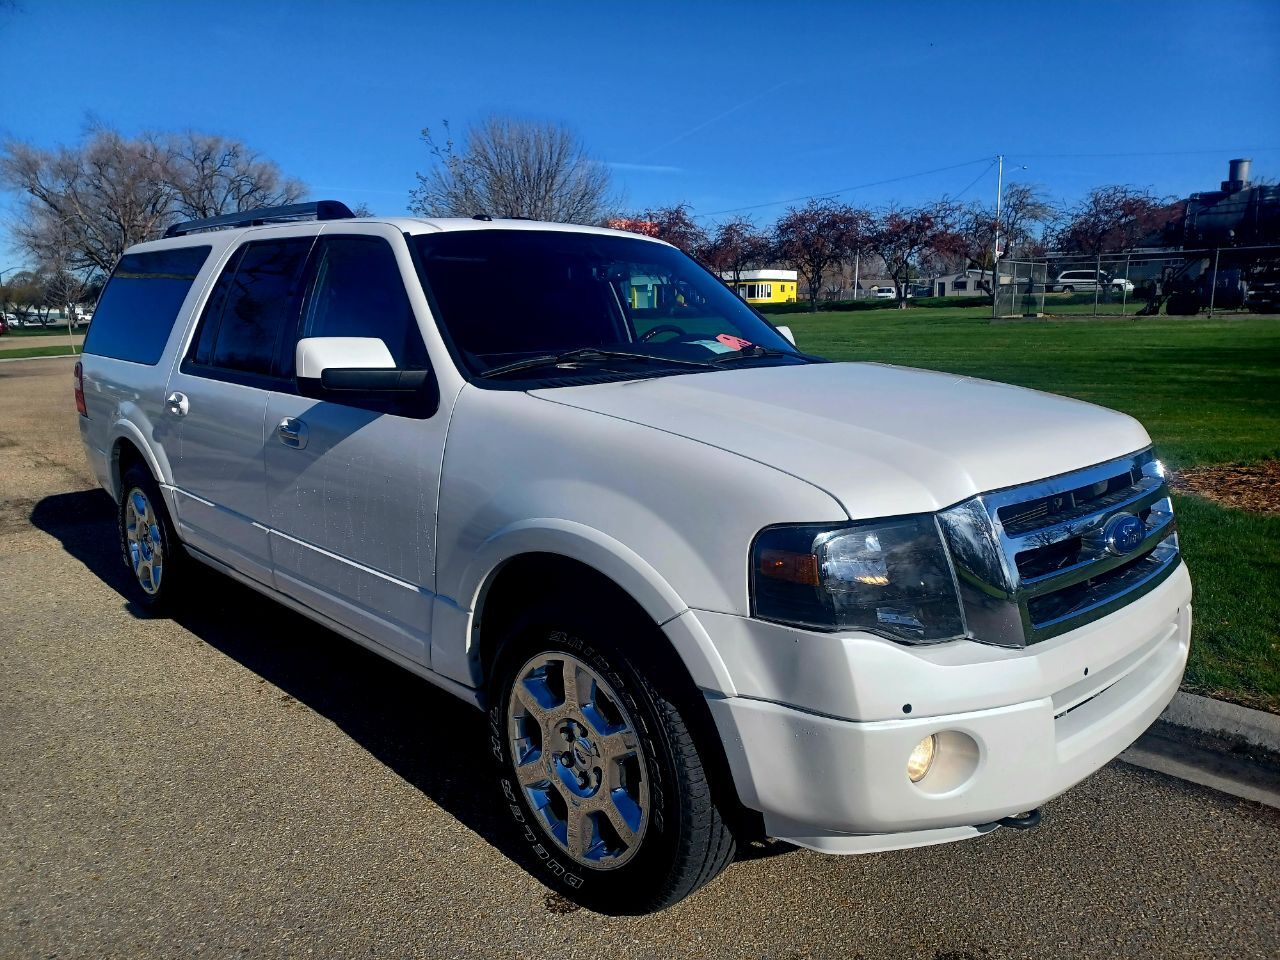 Ford Expedition EL For Sale - Carsforsale.com®